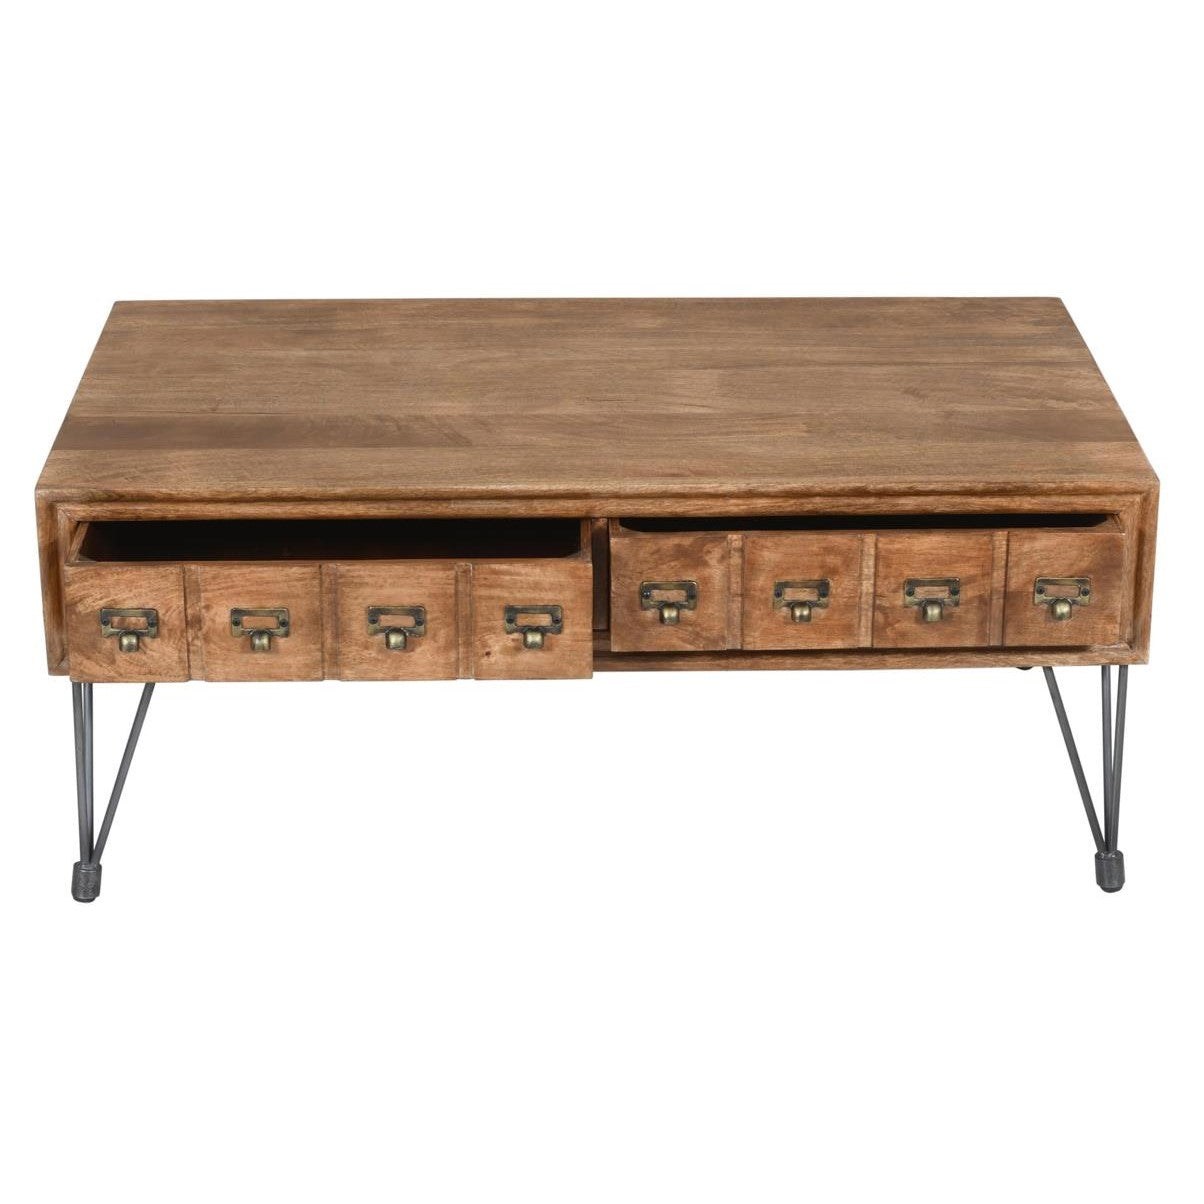 Picture of Adams 46" Coffee Table